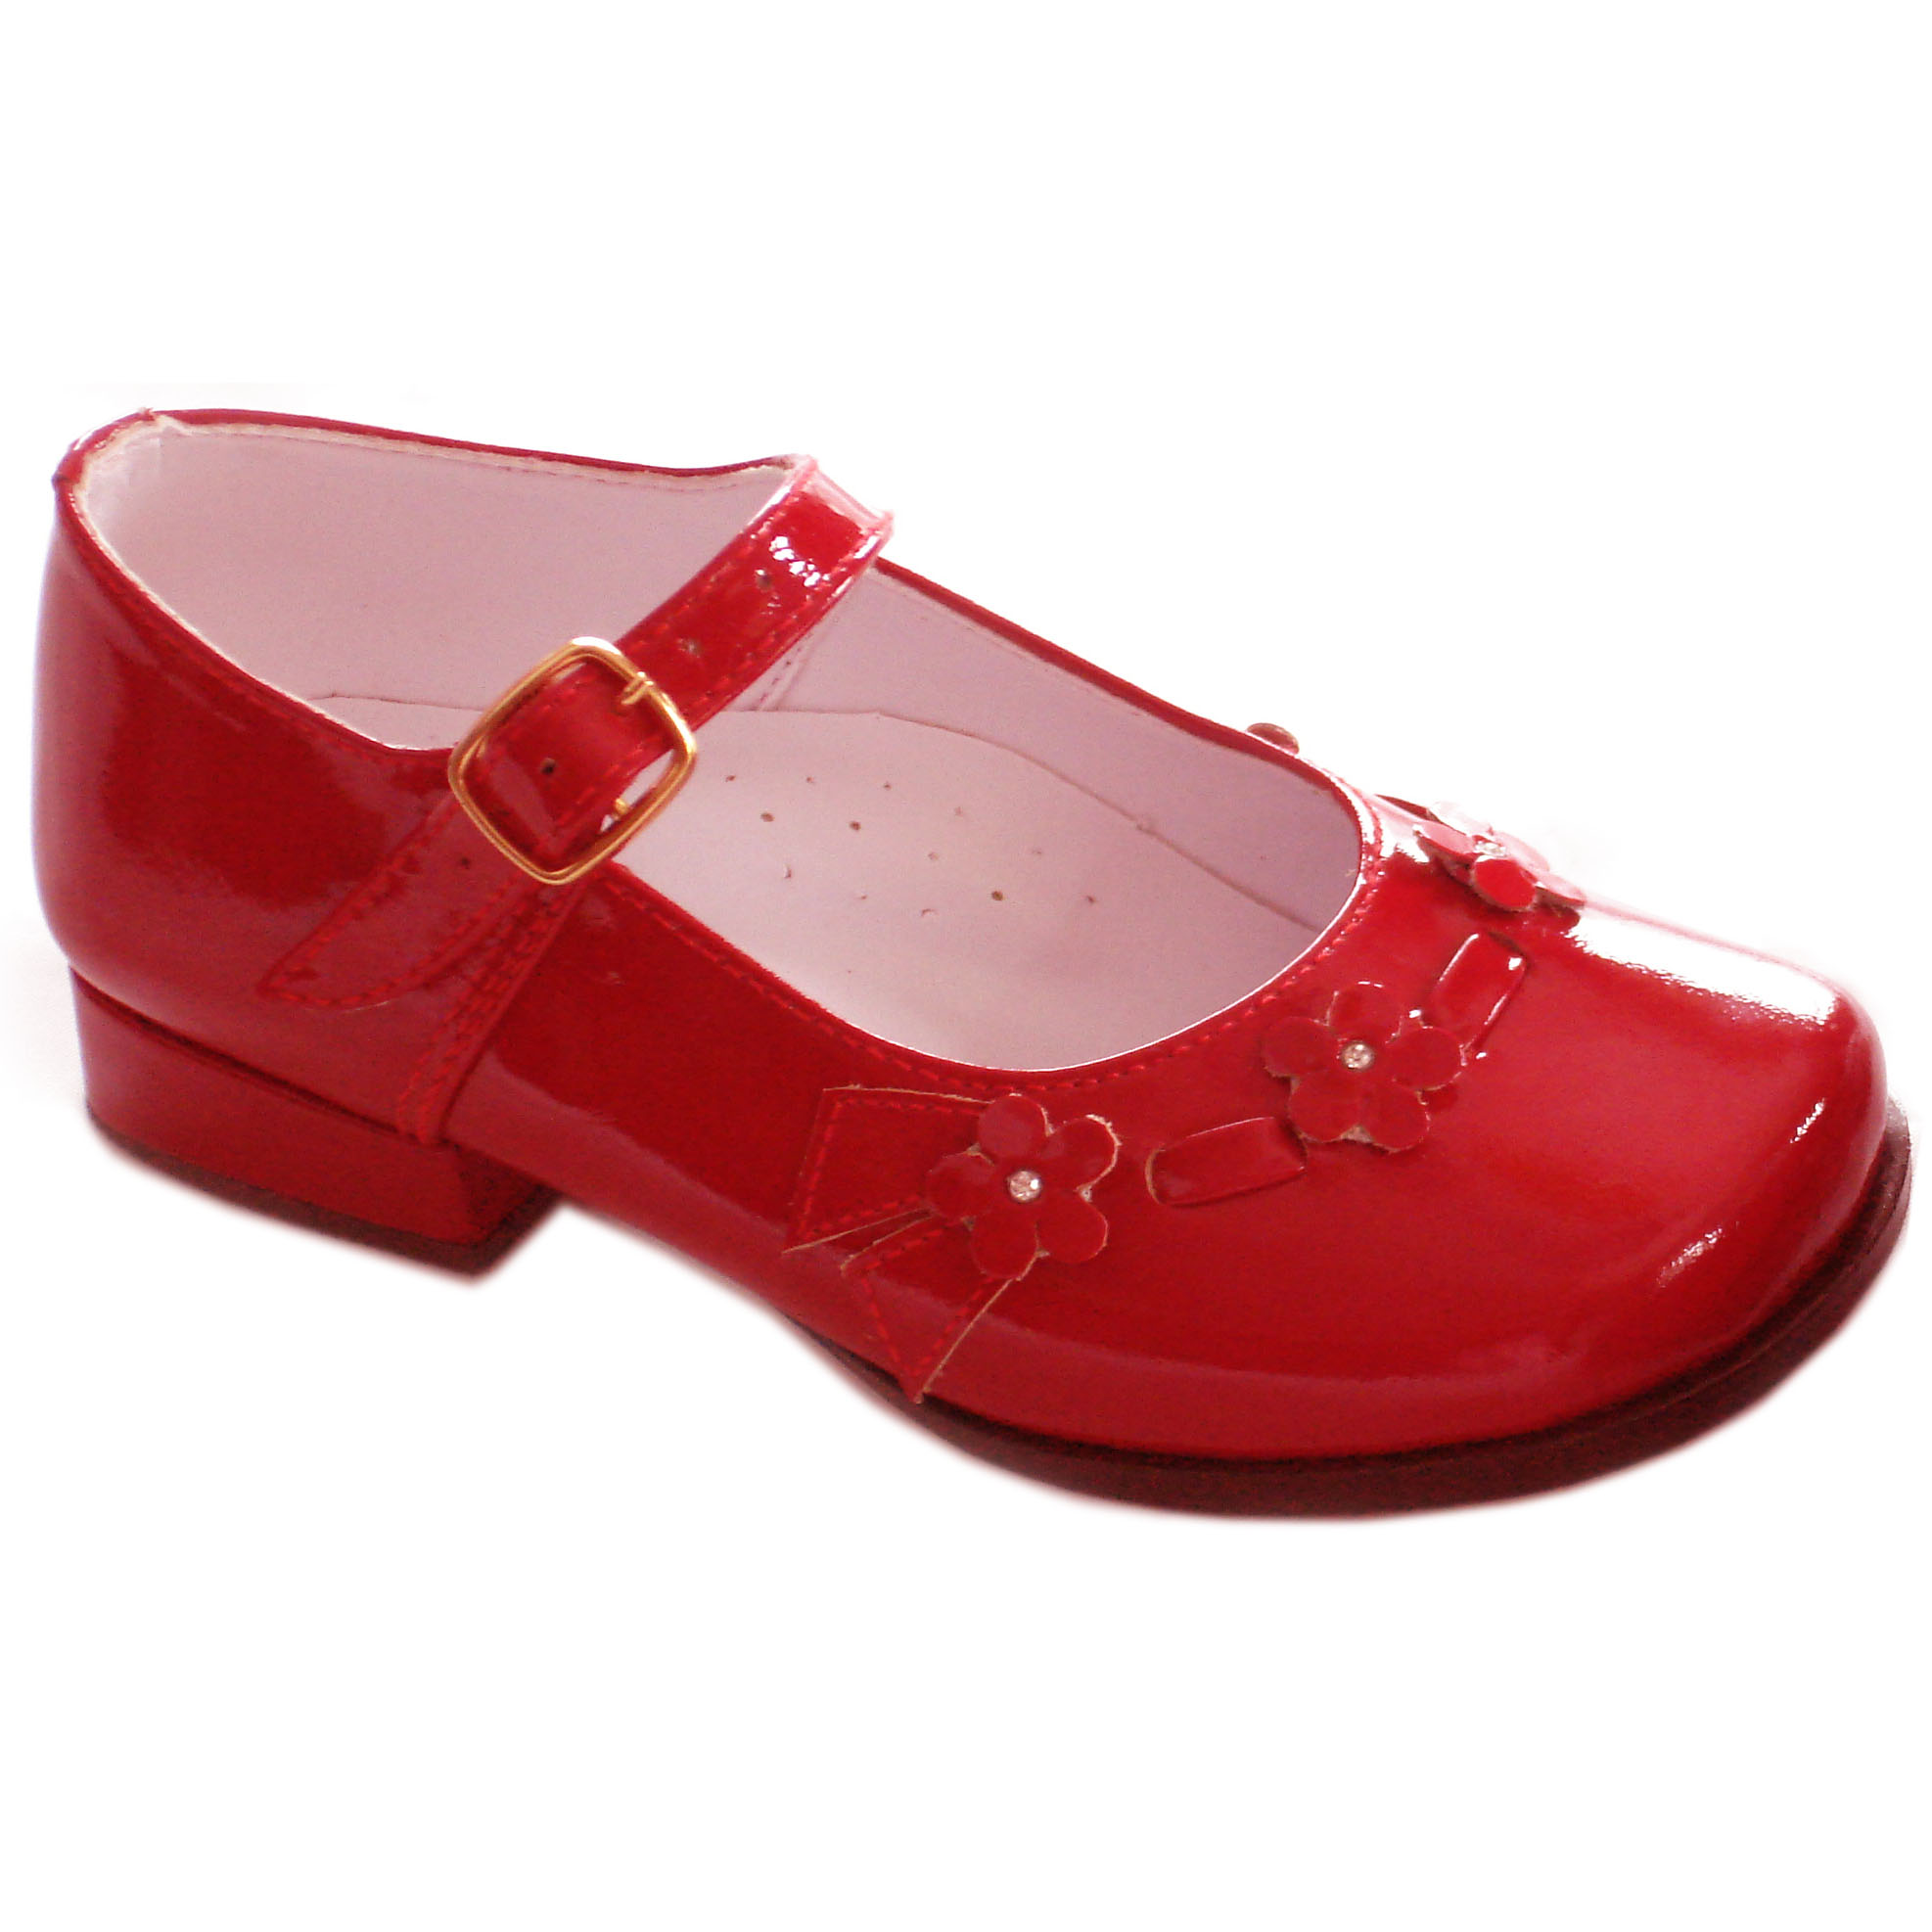 SALE Girls red patent Mary Jane shoes 